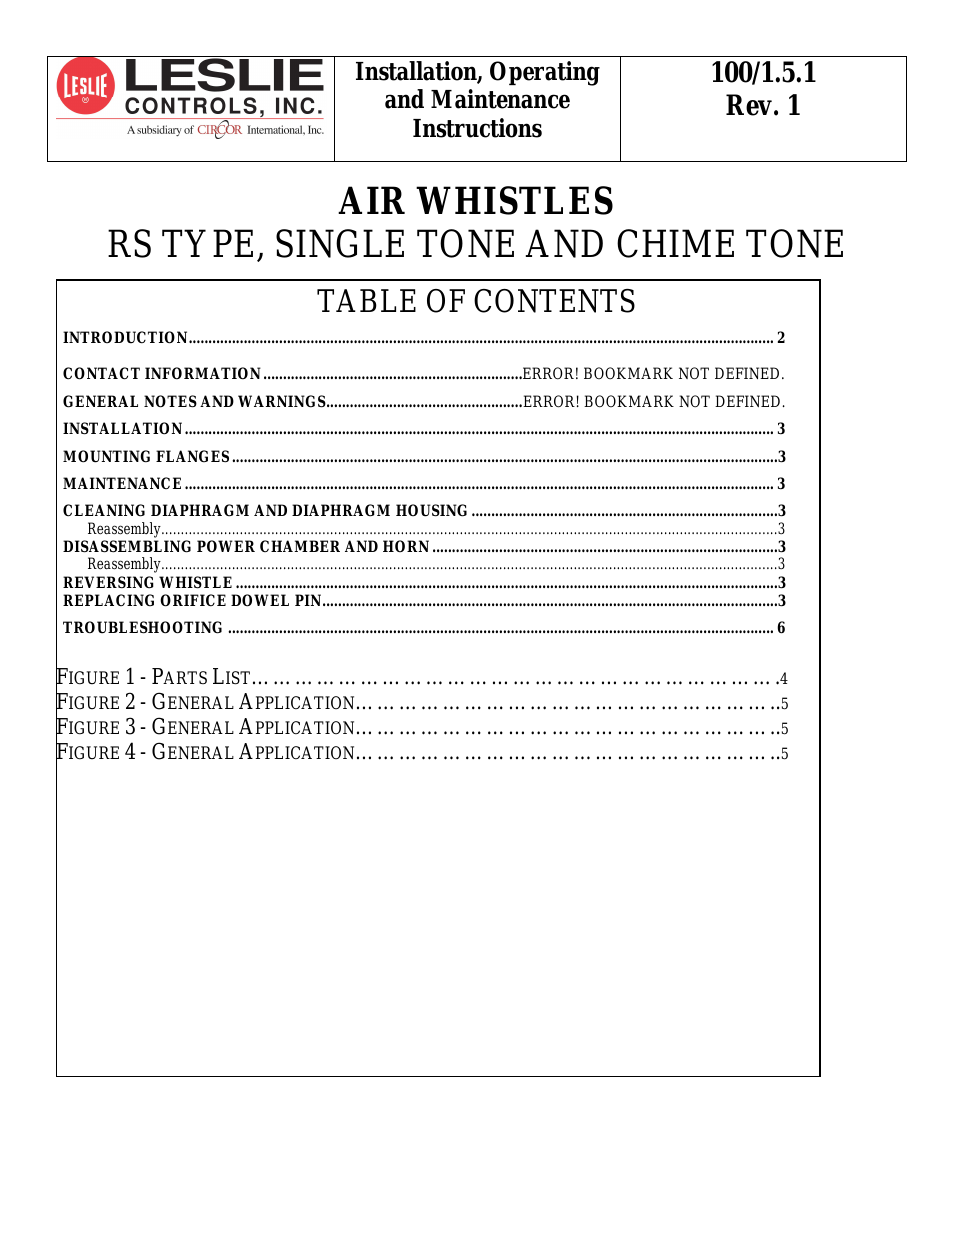 AIR WHISTLES - RS Type, Single Tone and Chime Tone